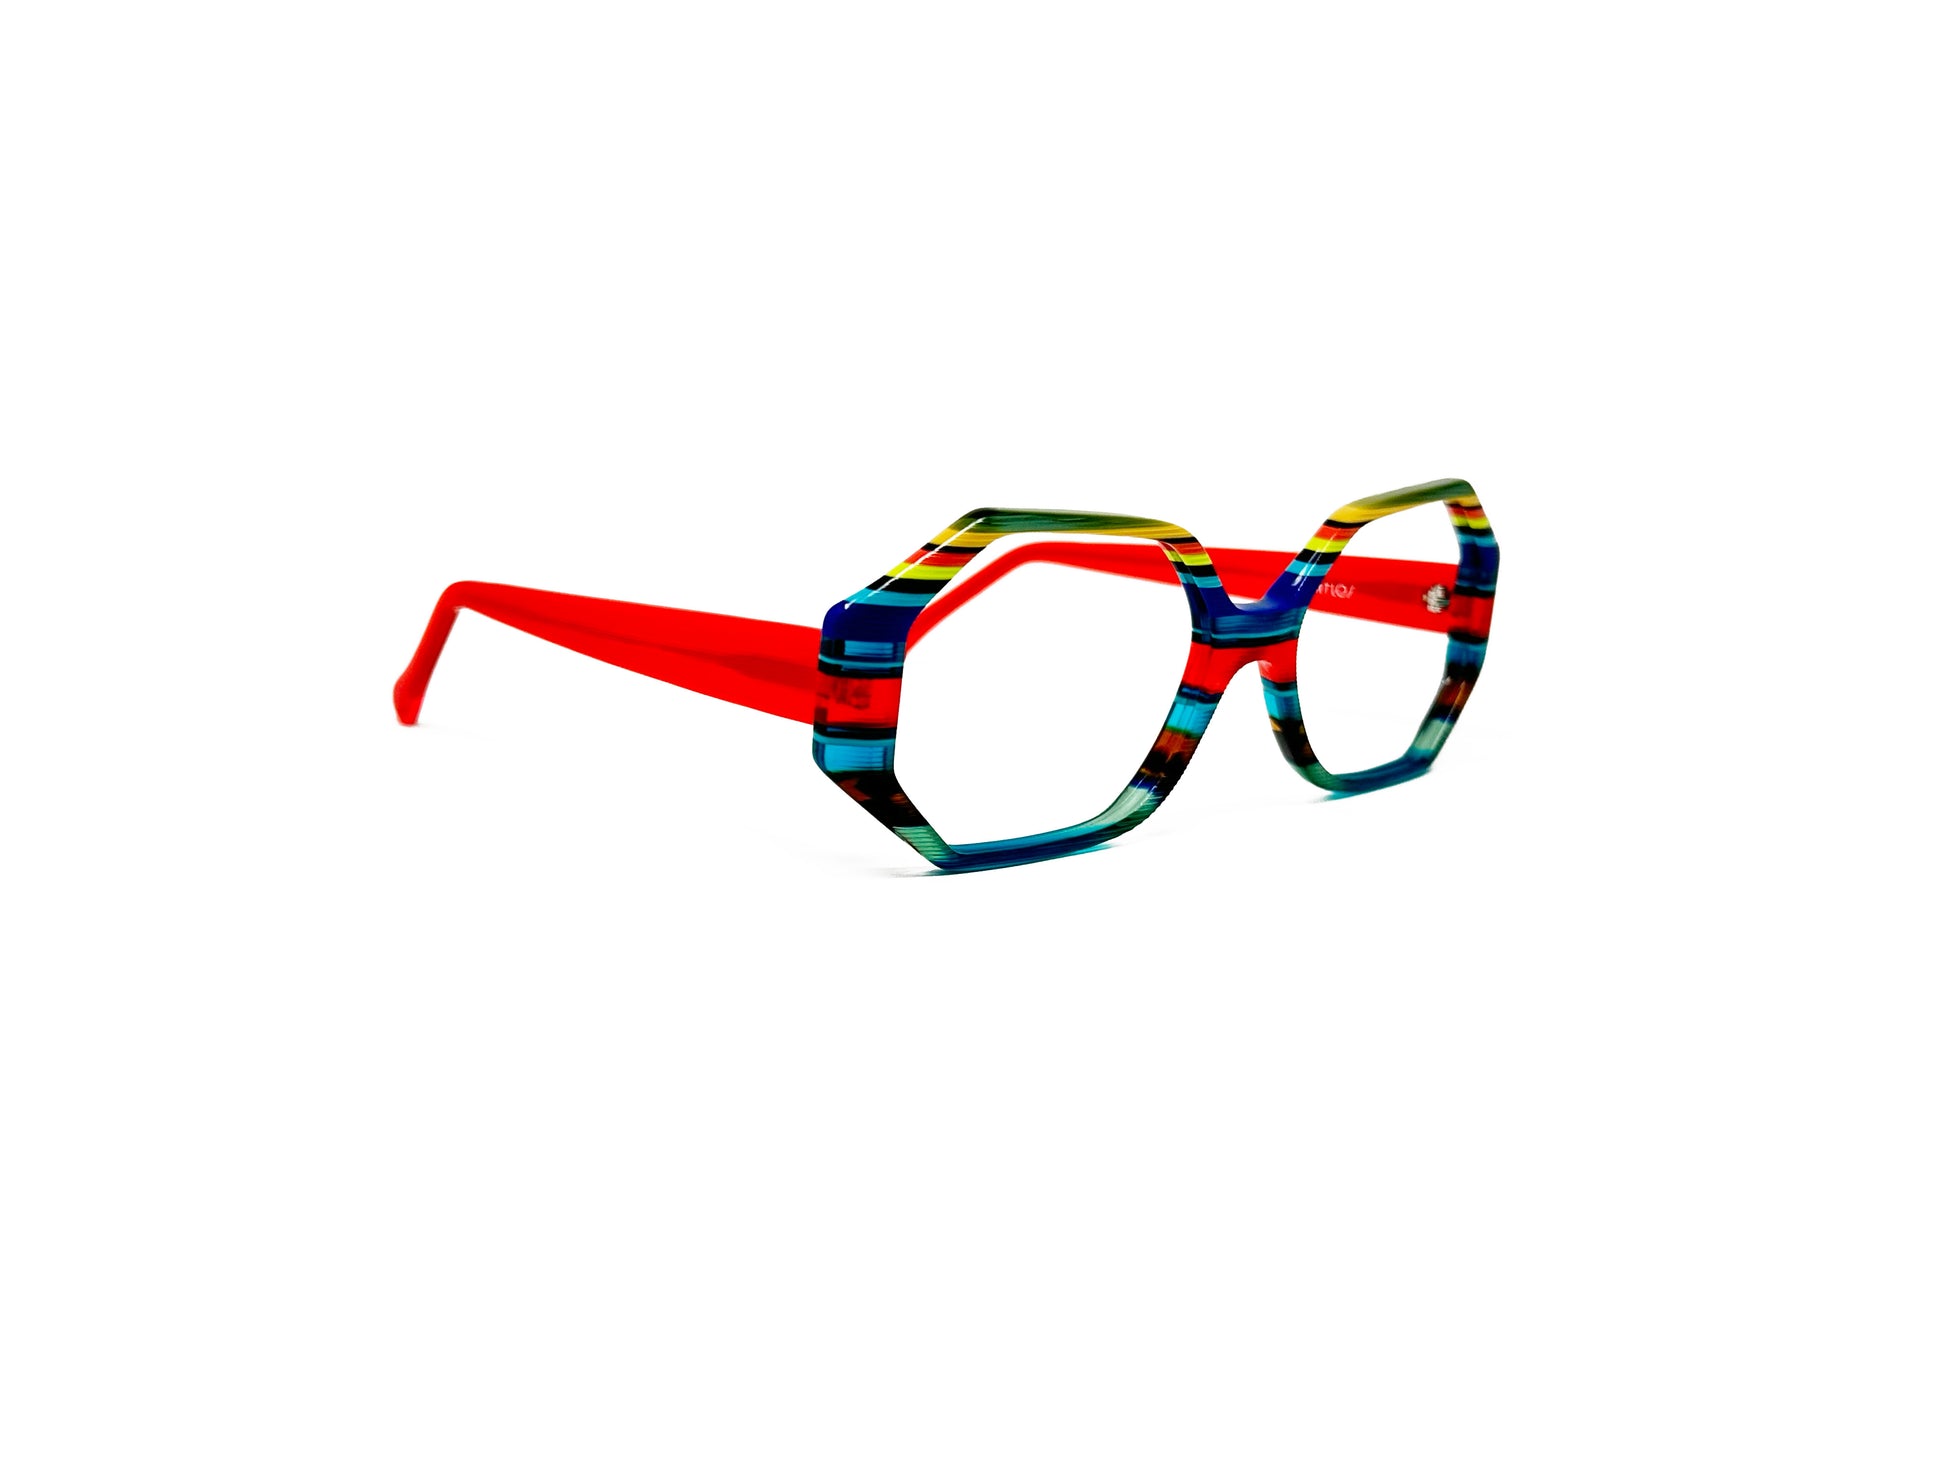 Viktlos rectangular heptagon shaped acetate optical frame. Model: 3318. Color: 1759RE87 - Multi-colored blue, red, green, and yellow stripes, with yellow temples. Side view.